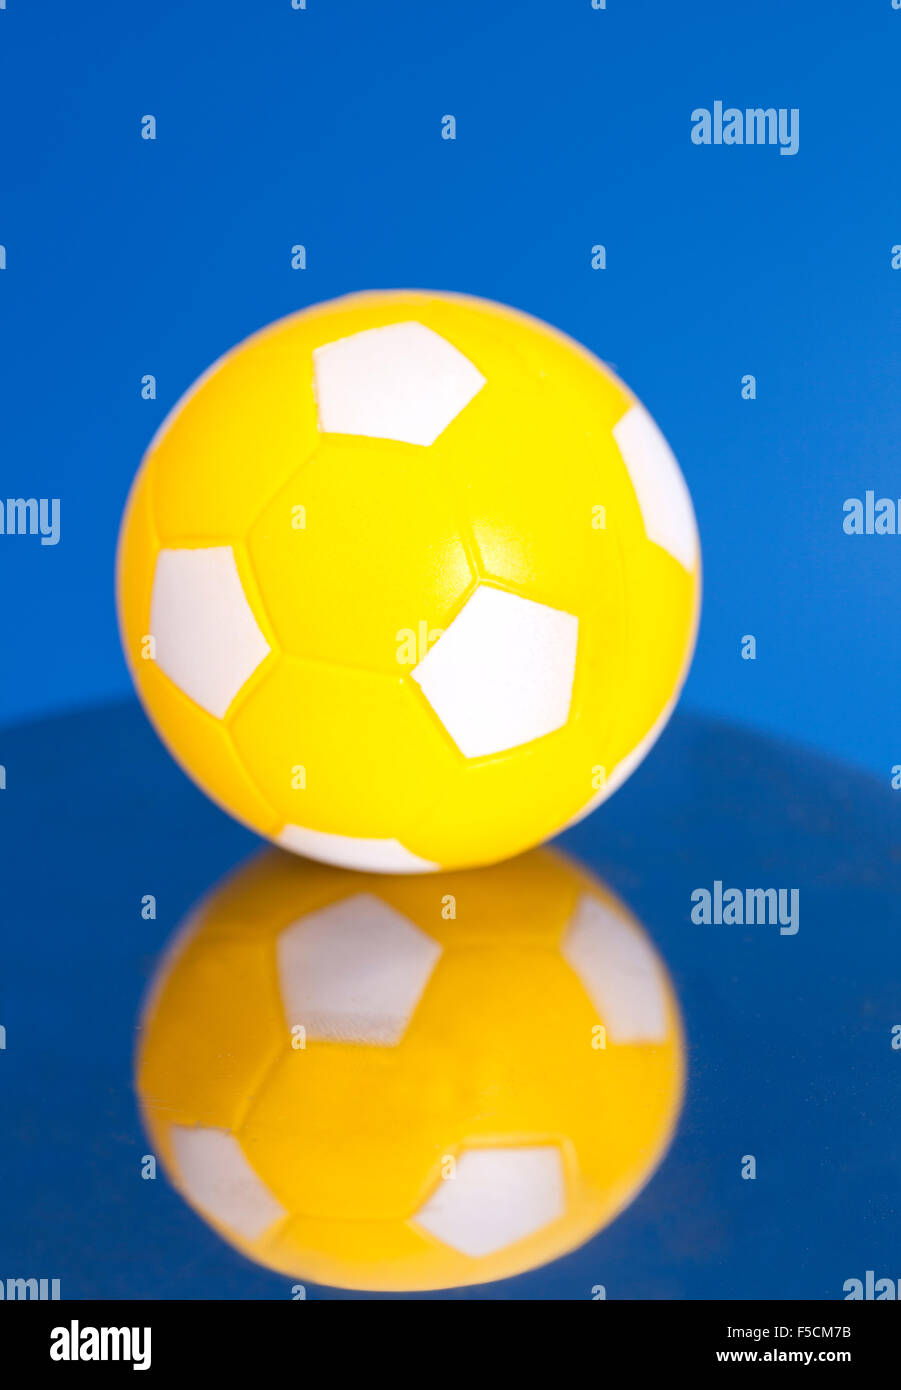 Yellow Soccer Ball with reflection on blue background Stock Photo - Alamy